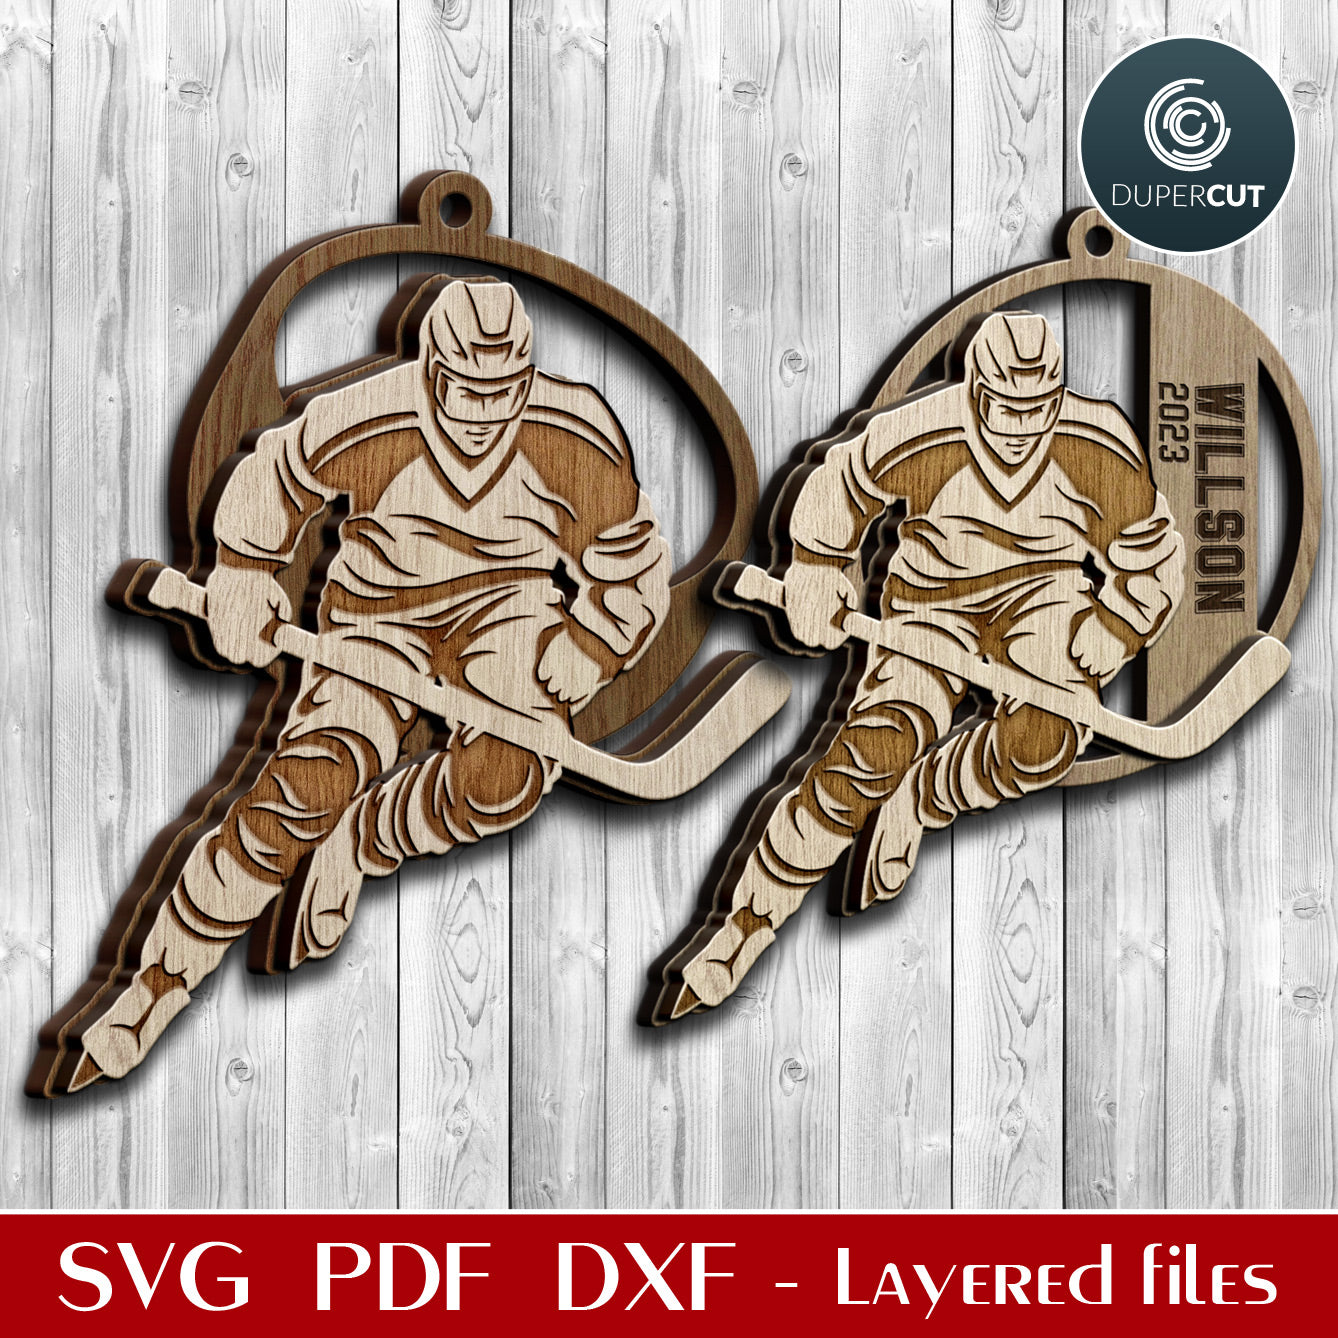 Hockey player ornaments layered cut files template, Christmas tree decoration SVG files for Glowforge, Xtool, CNC laser machines, Cricut, by www.DuperCut.com